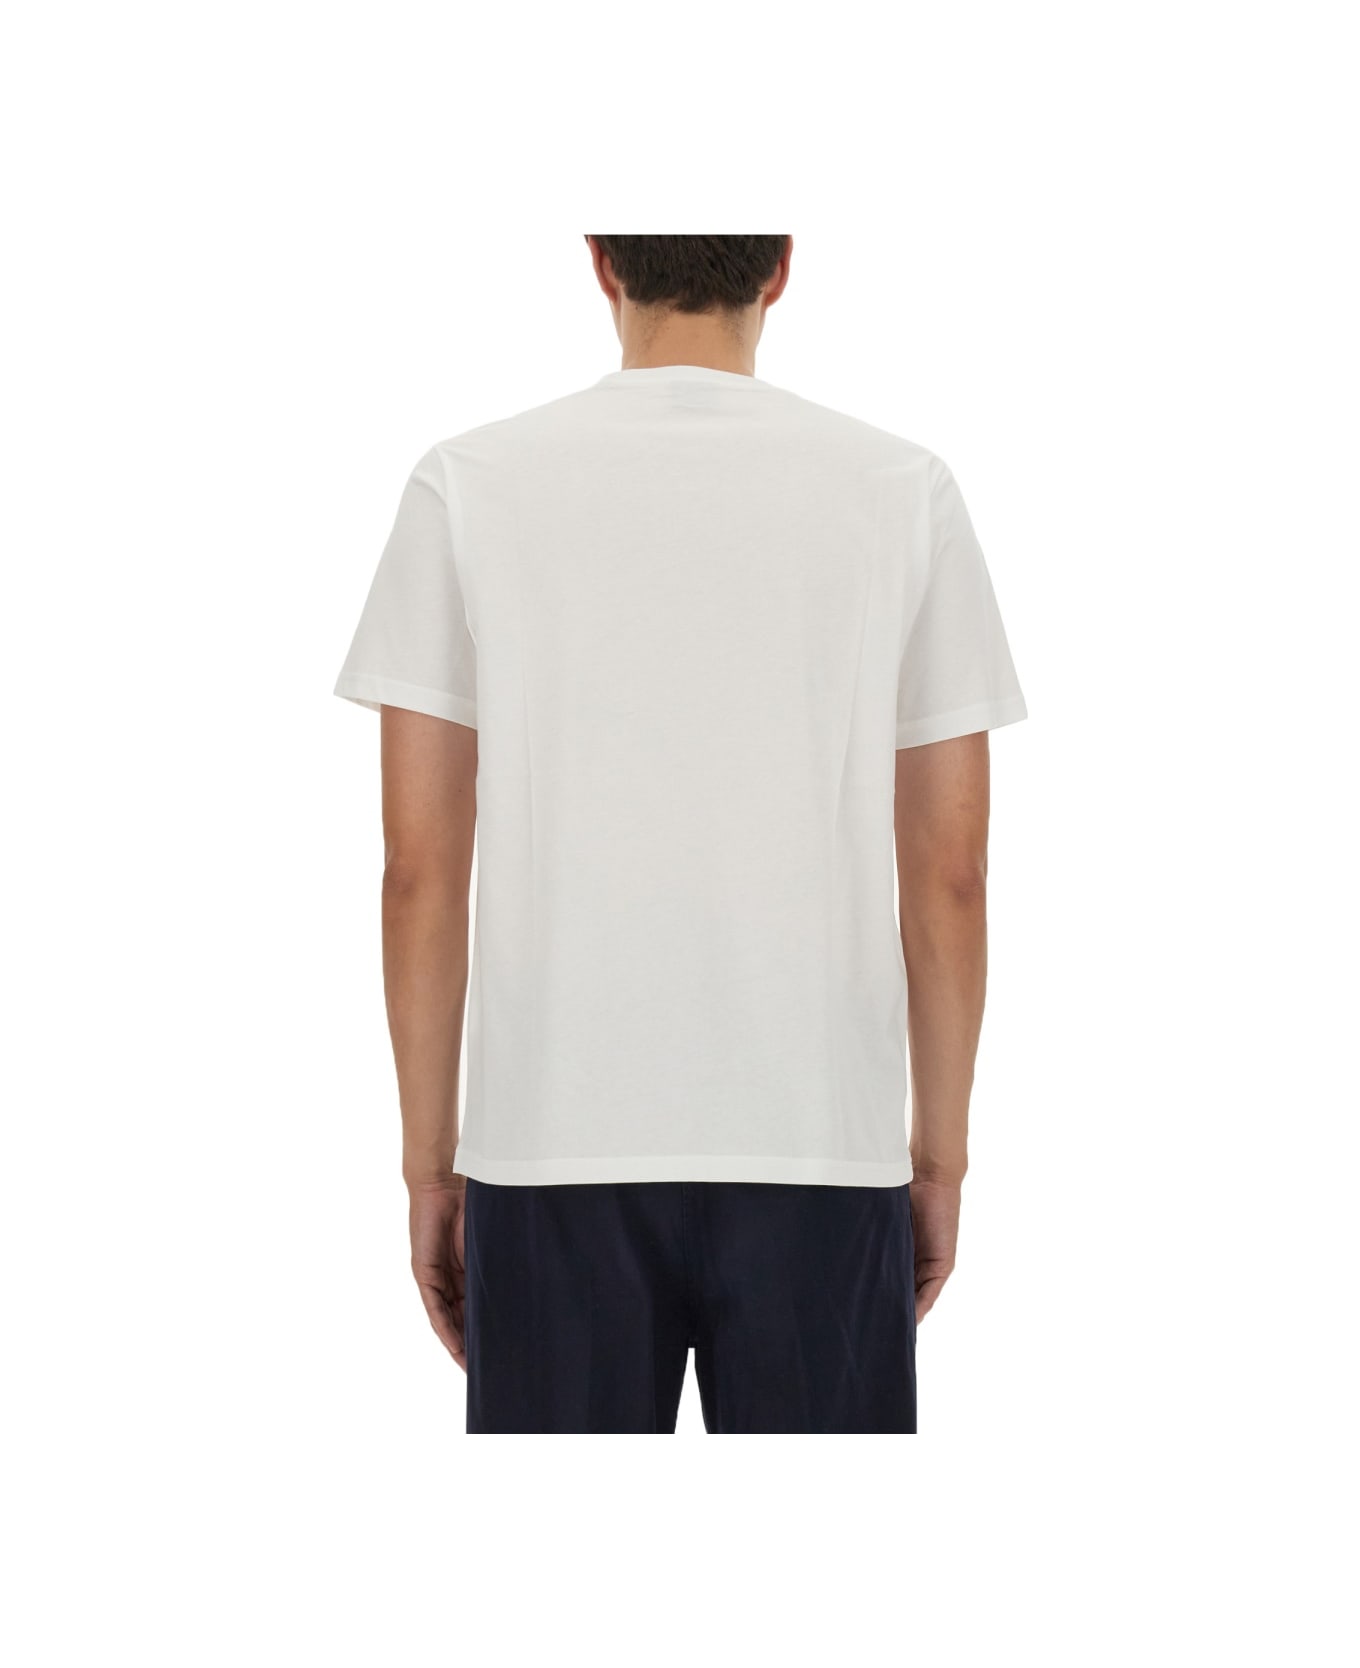 PS by Paul Smith Wooden Skull Print T-shirt - WHITE